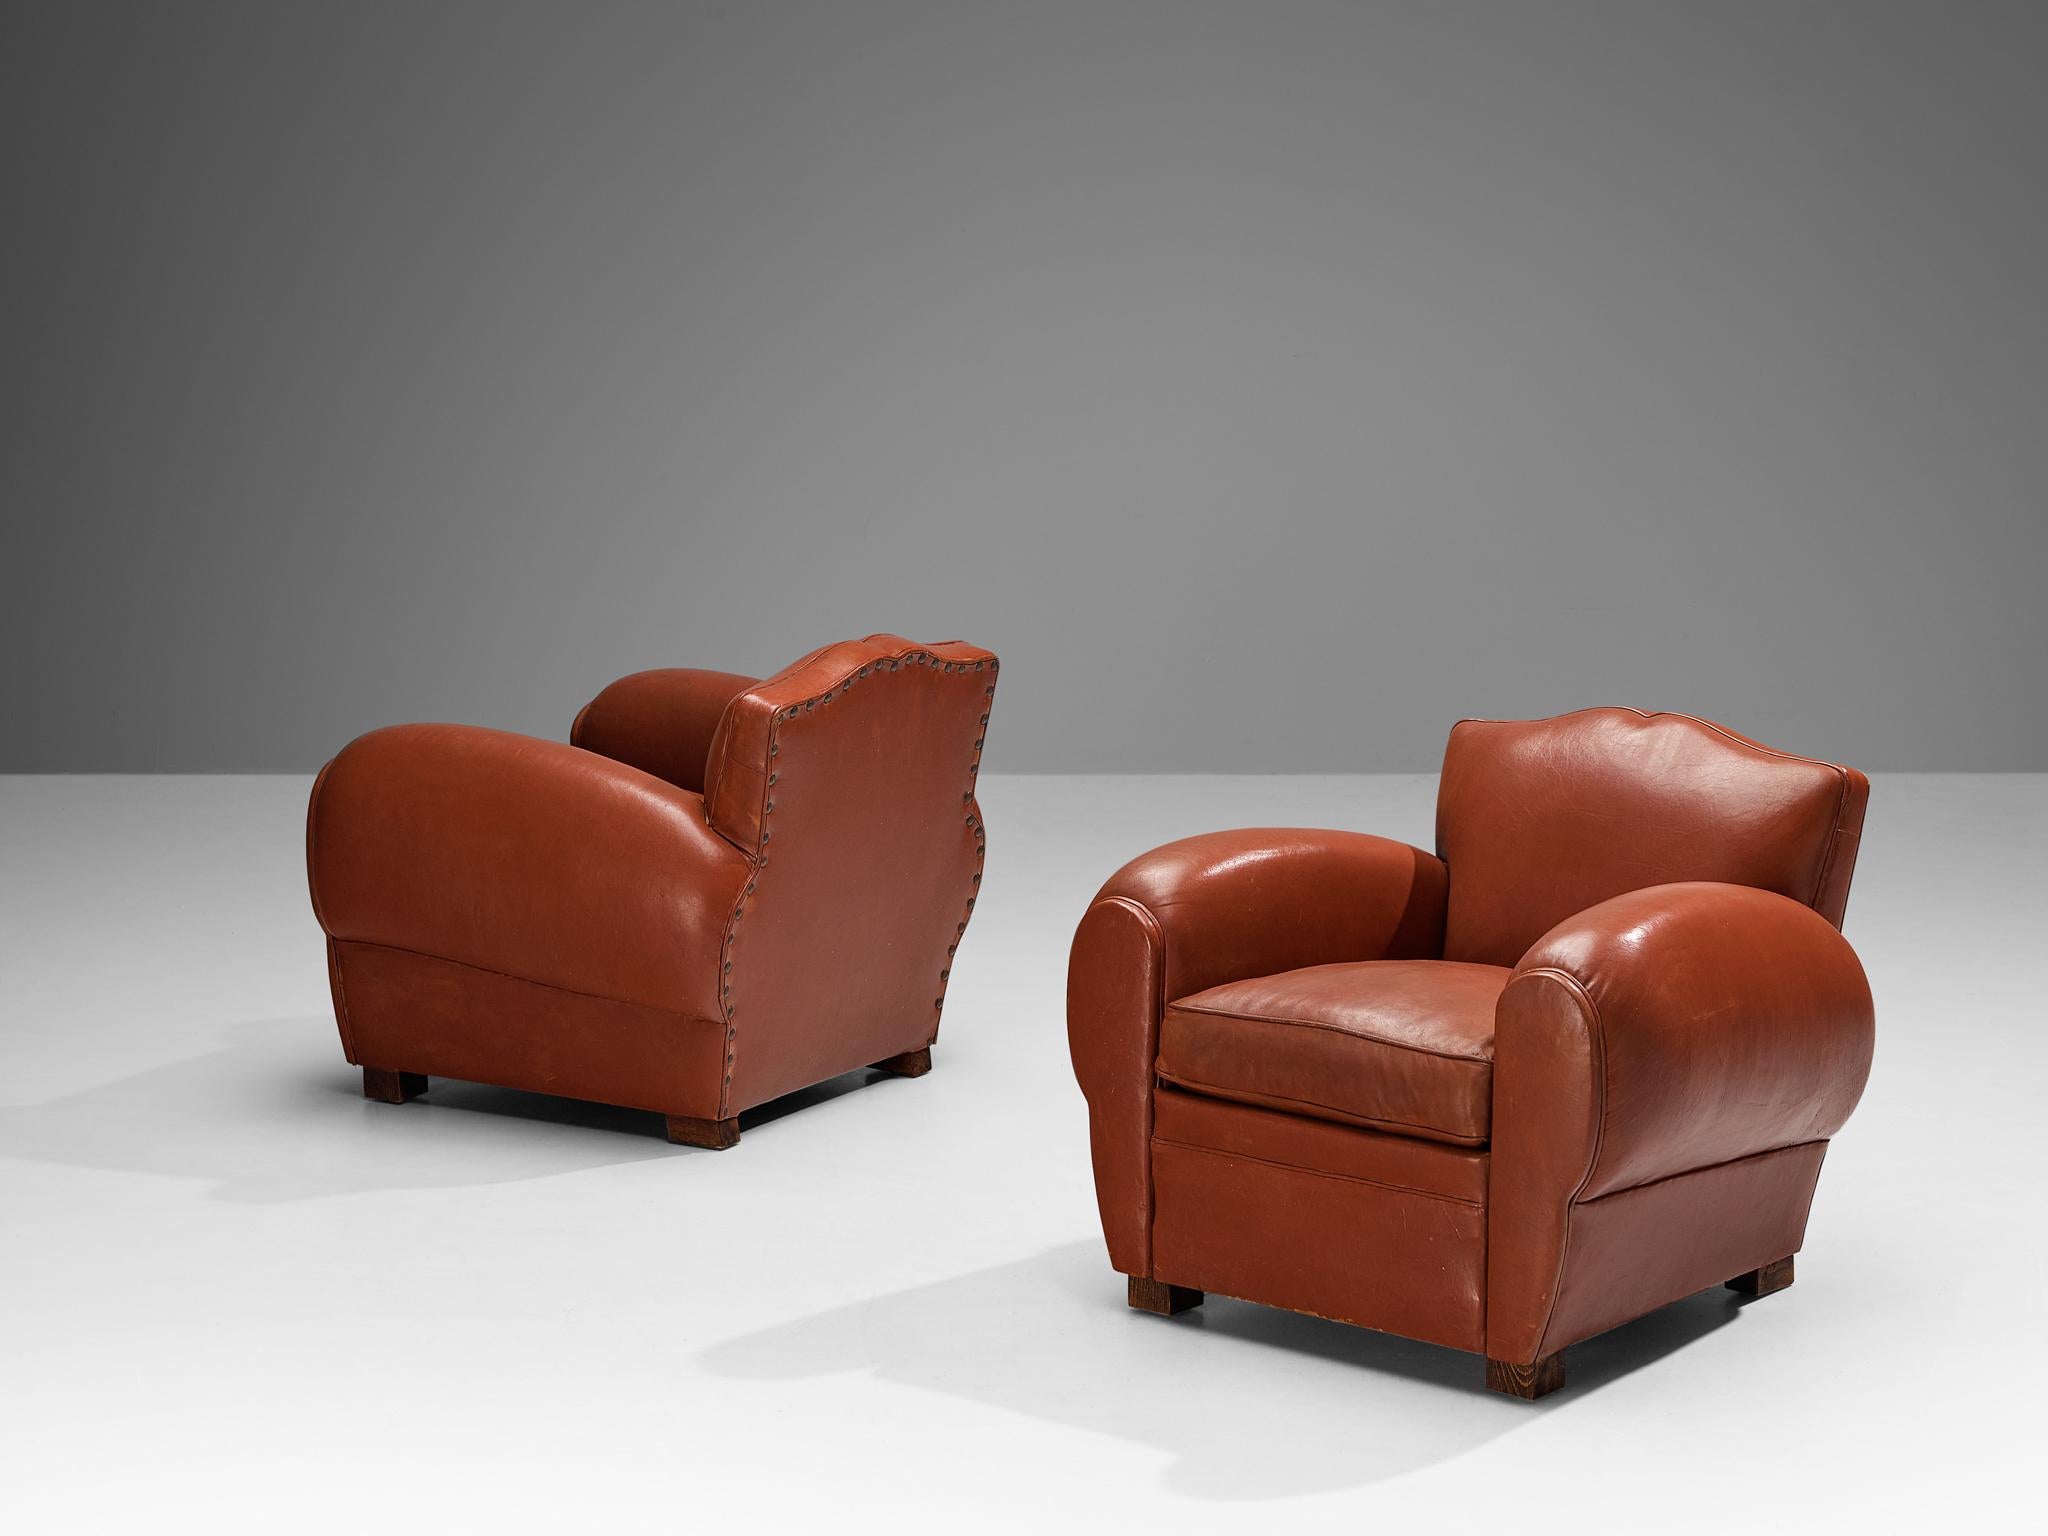 Maurice Rinck, pair of lounge chairs, reddish brown leather, beech, France, 1940s

Grand and comfortable set of two club chairs in leather upholstery. Truly extraordinary and luxurious chairs that feature a deep seat and large rounded, curved